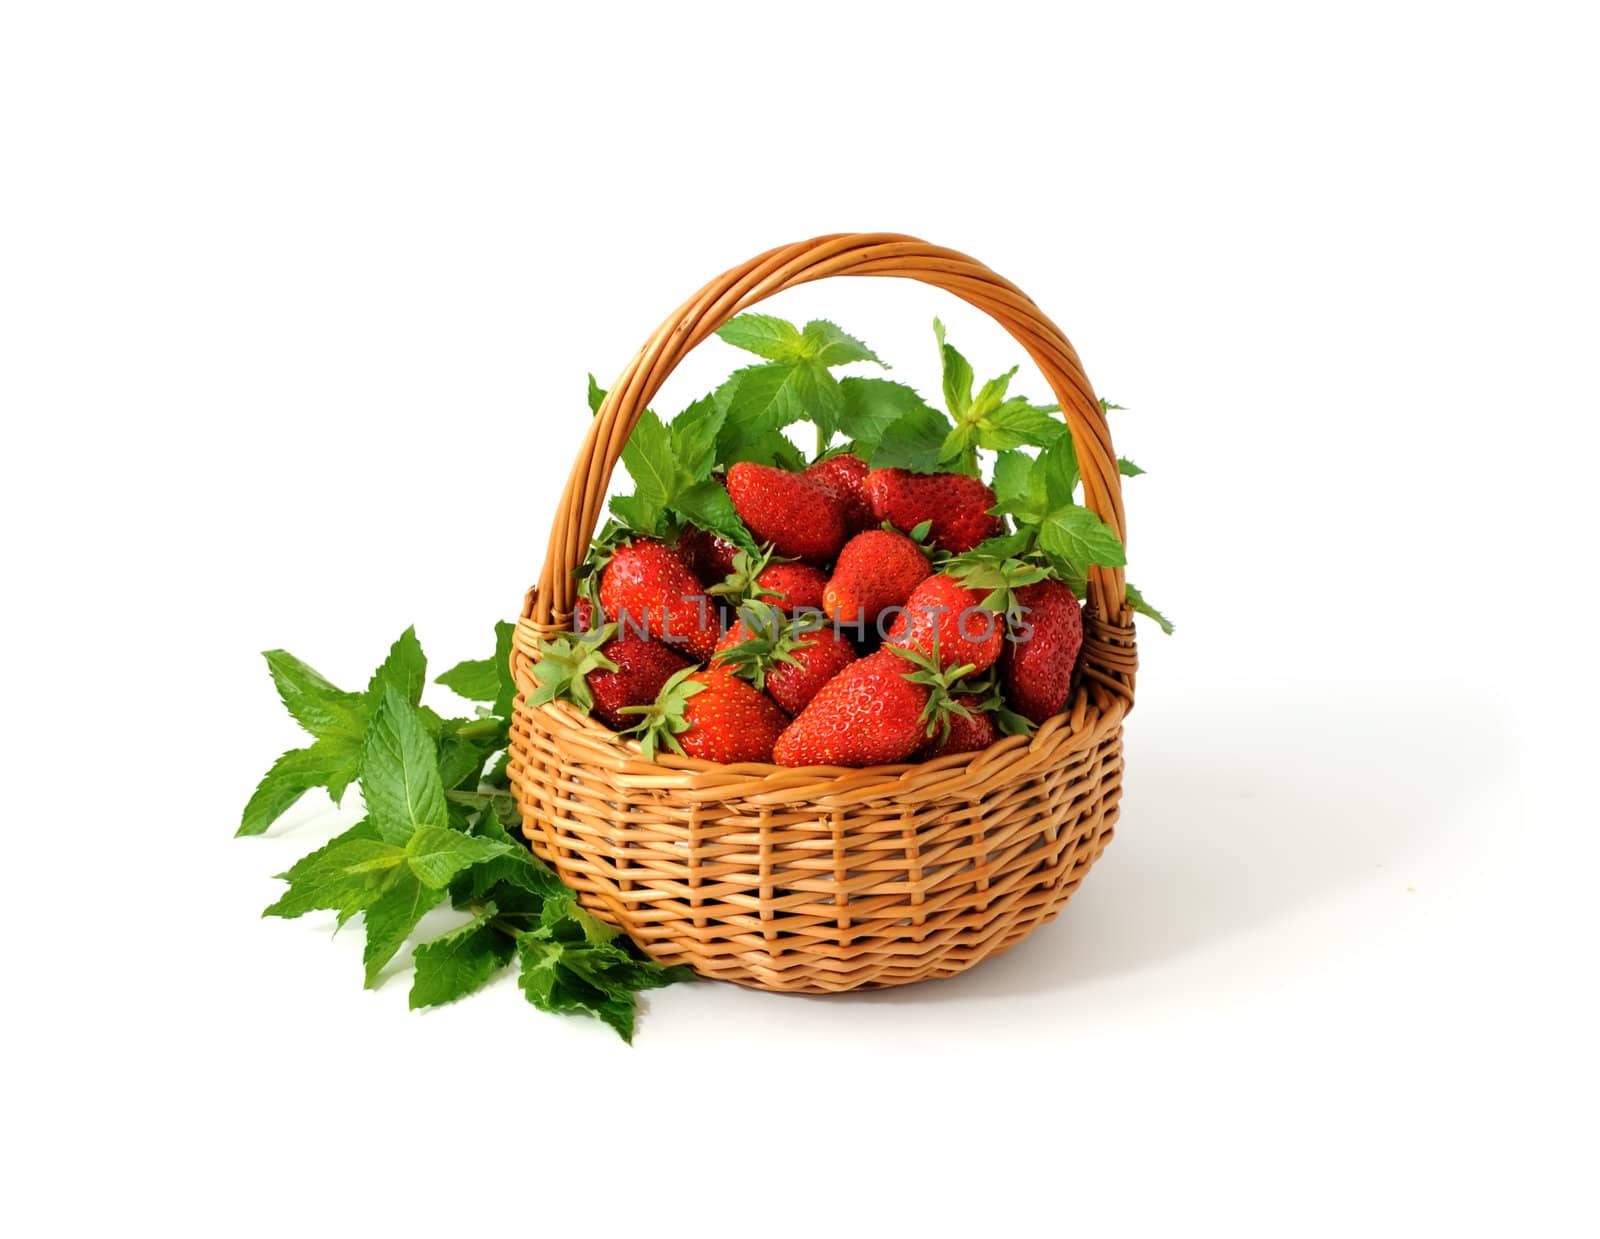 Strawberries in basket by Apolonia